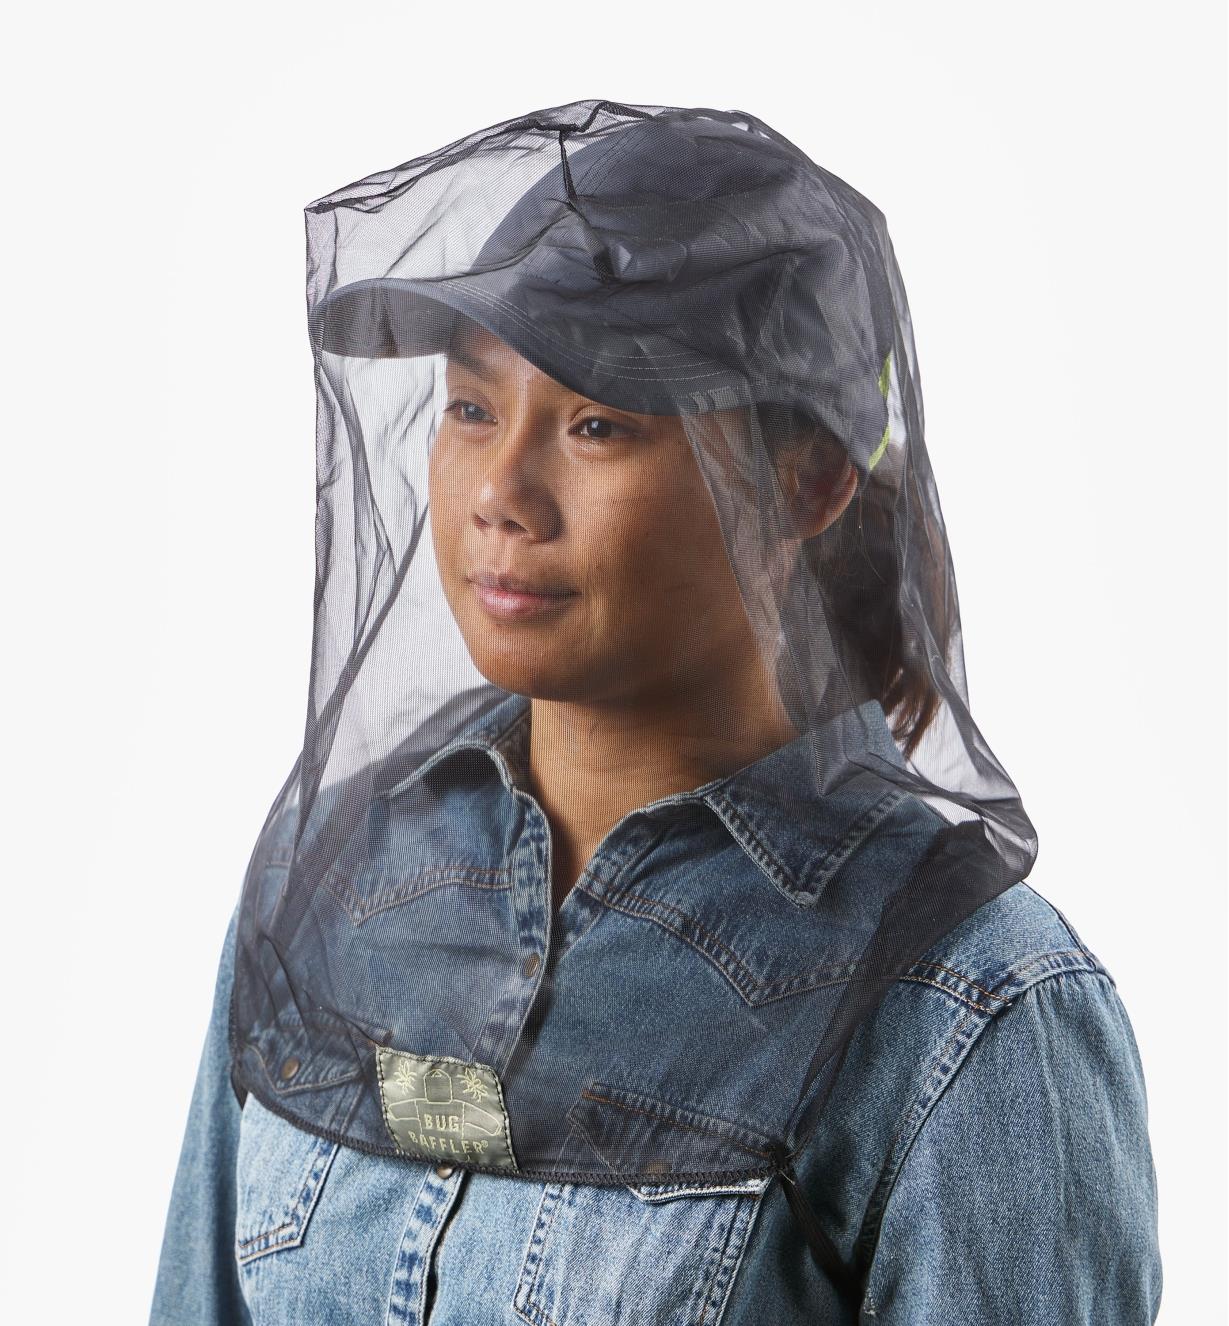 A woman wearing a baseball cap with a bug-protection hood worn over it